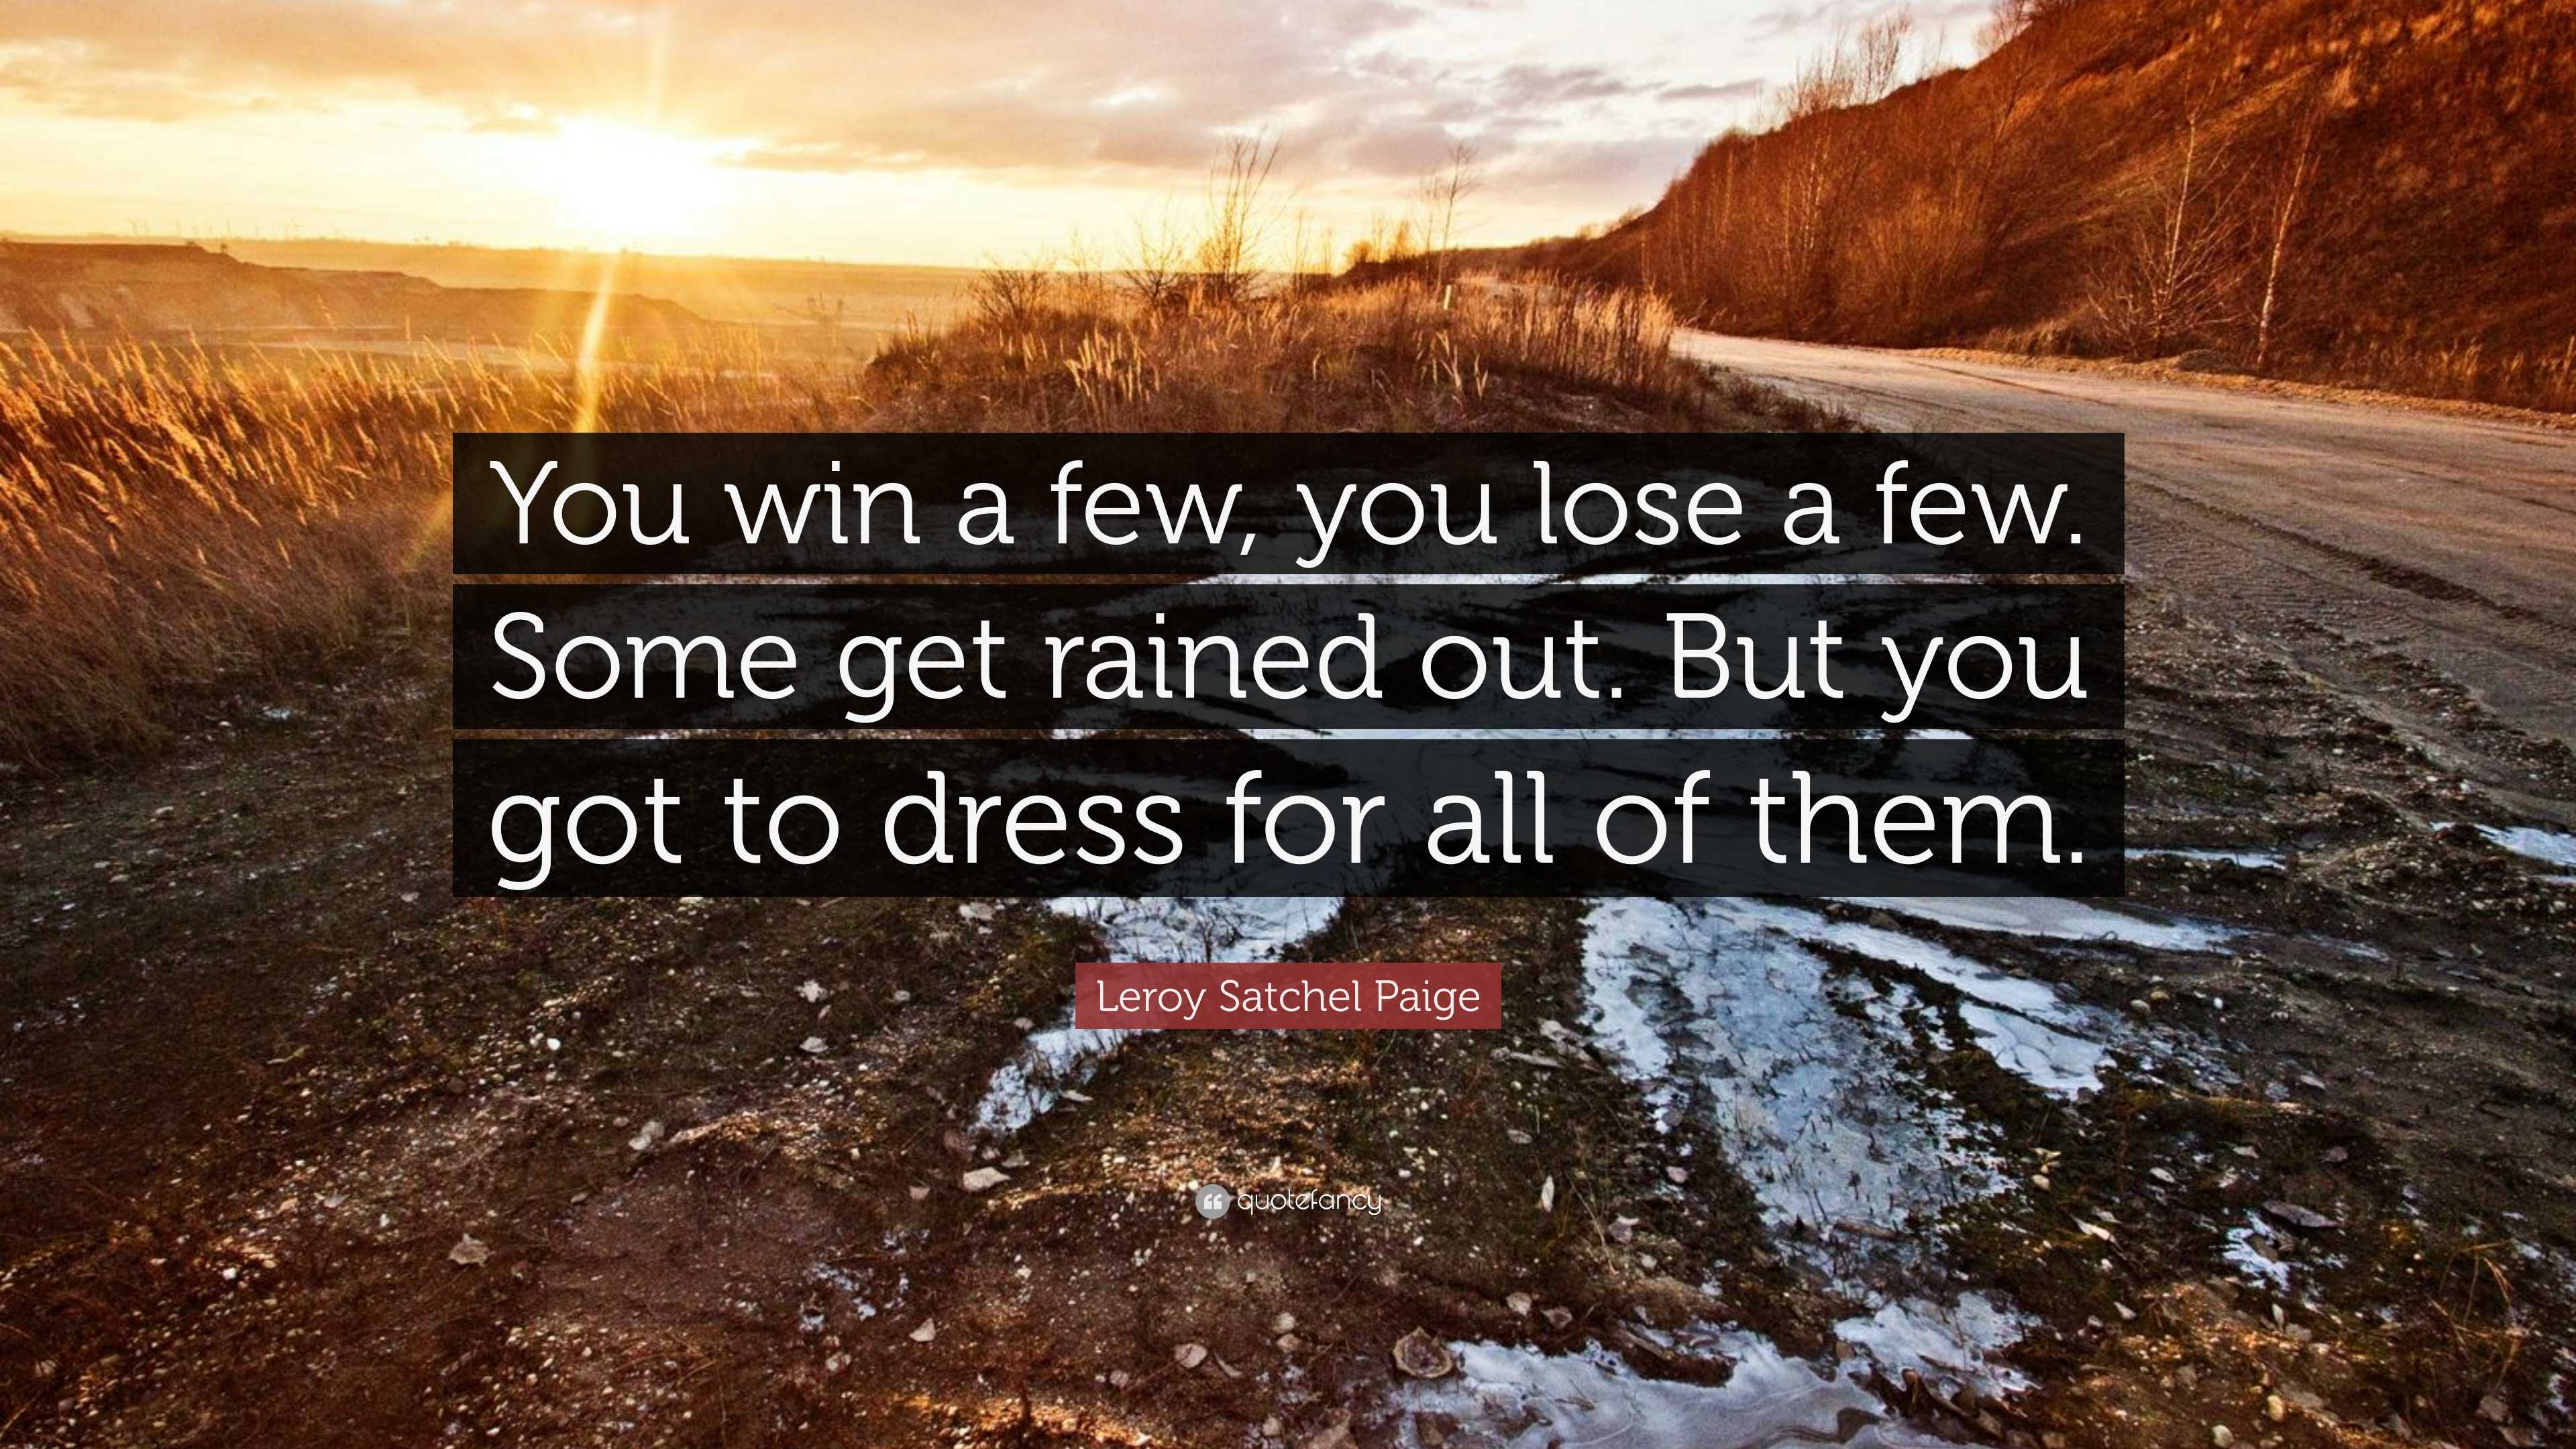 You Win a Few, You Lose a Few. Some Get Rained Out. But You Got to Dress  for All of Them